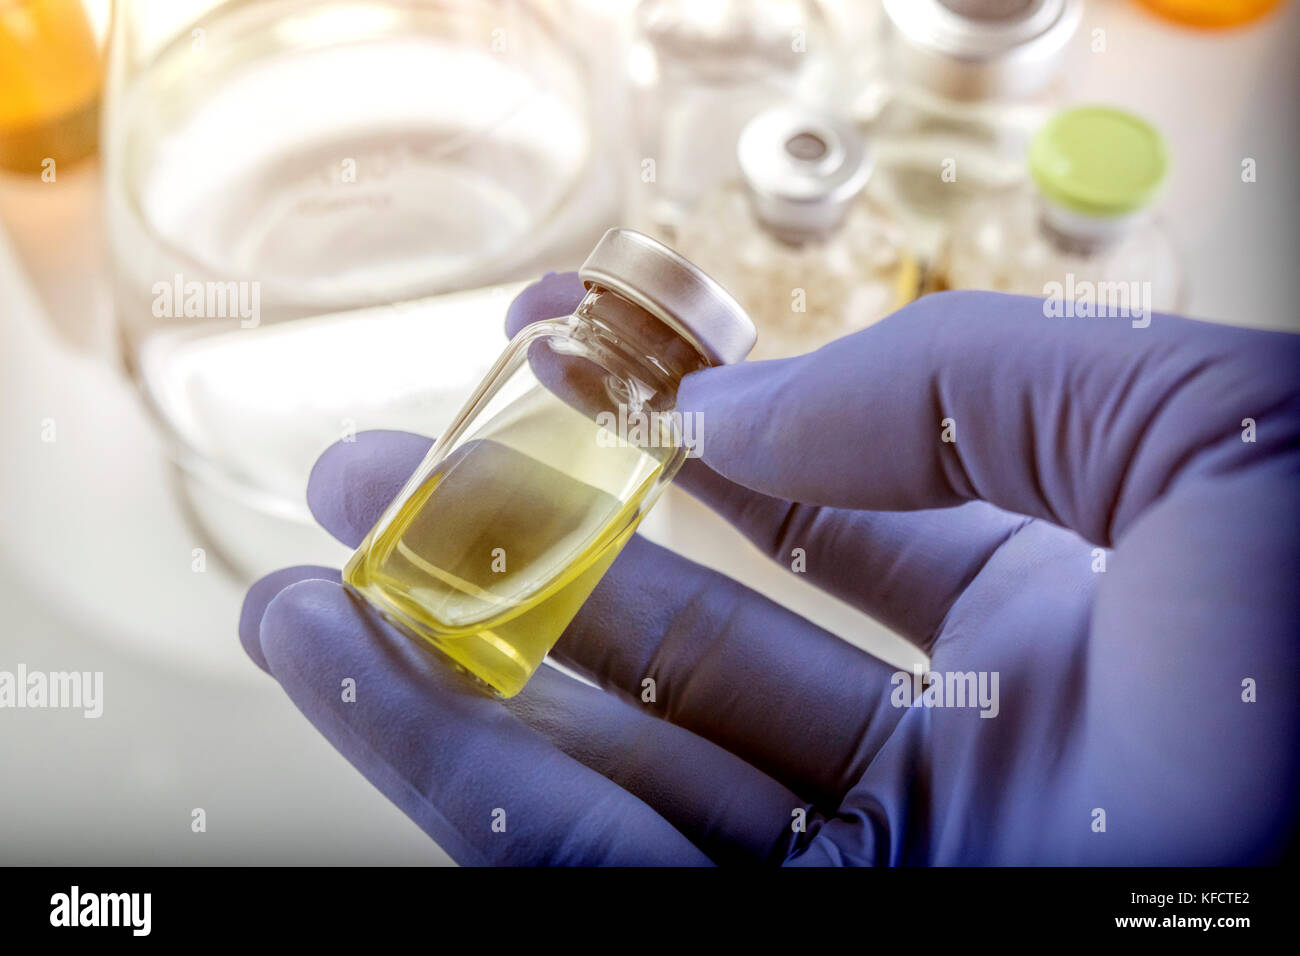 Detail Of Hand Medical Holding A Vial, Conceptual Image Stock Photo